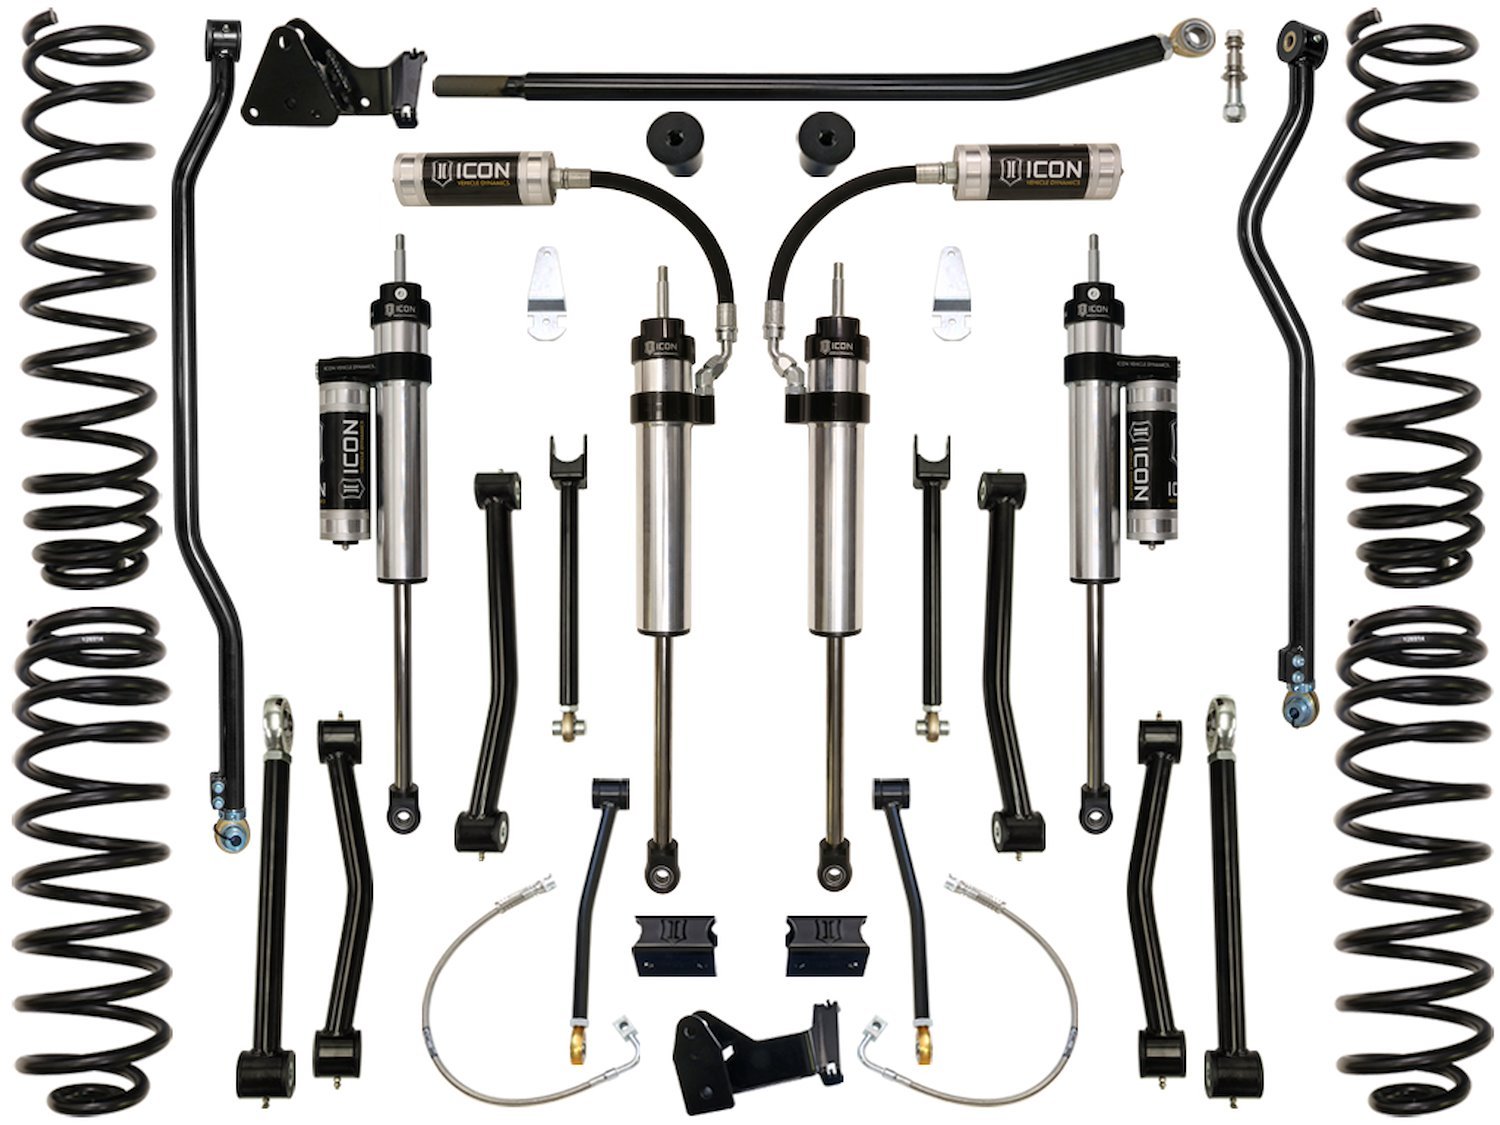 K24003 Front and Rear Suspension Lift Kit, Lift Amount: 4.5 in. Front/4.5 in. Rear